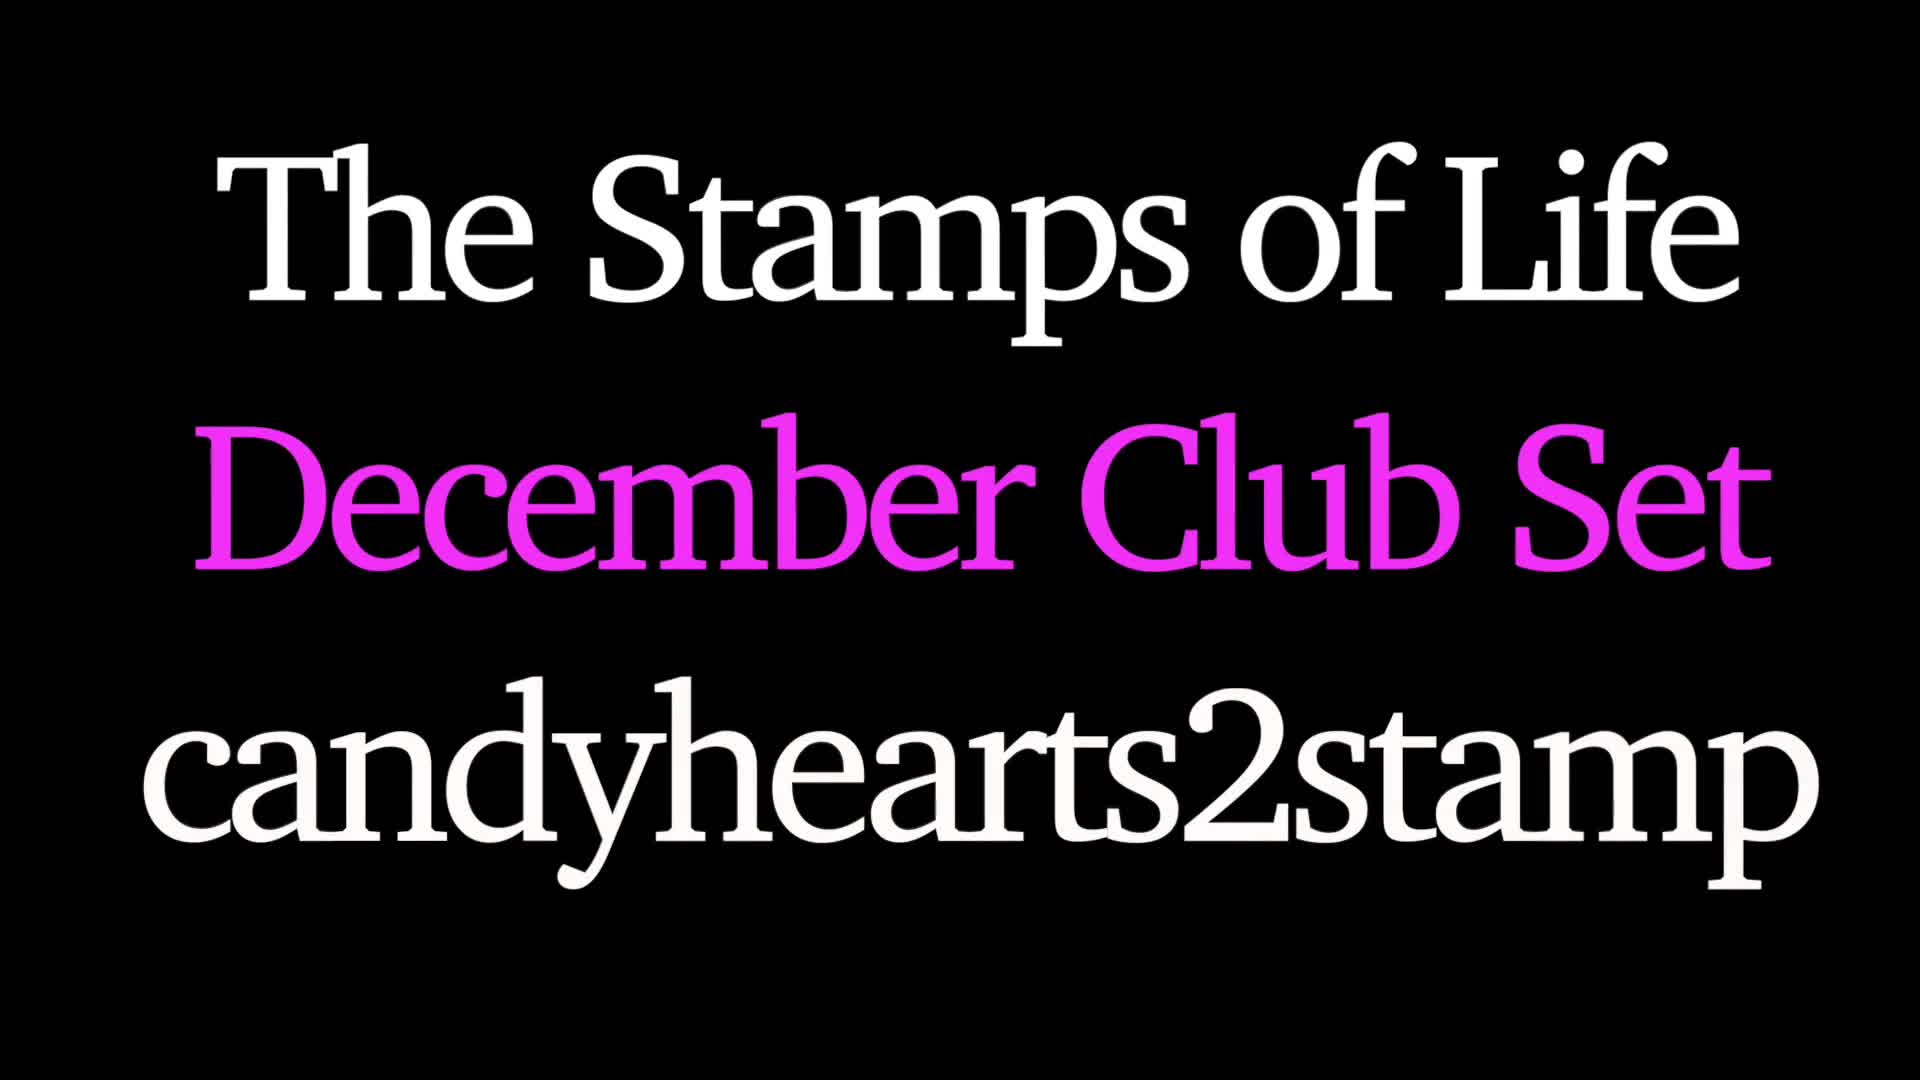 The Stamps of Life December Club Candyhearts